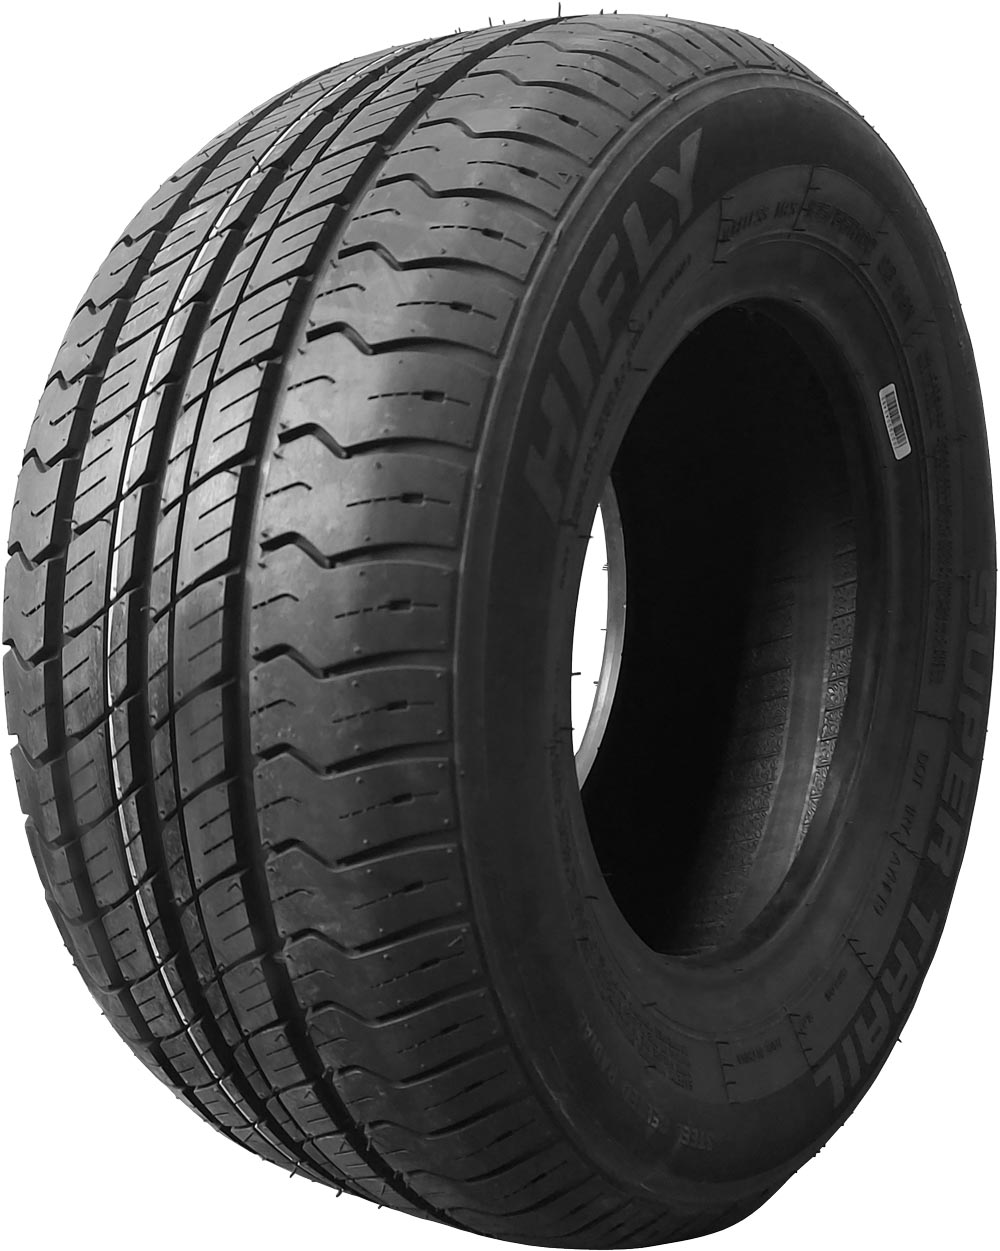 Anvelope microbuz HIFLY SUPER TRAIL 195/50 R13 104N